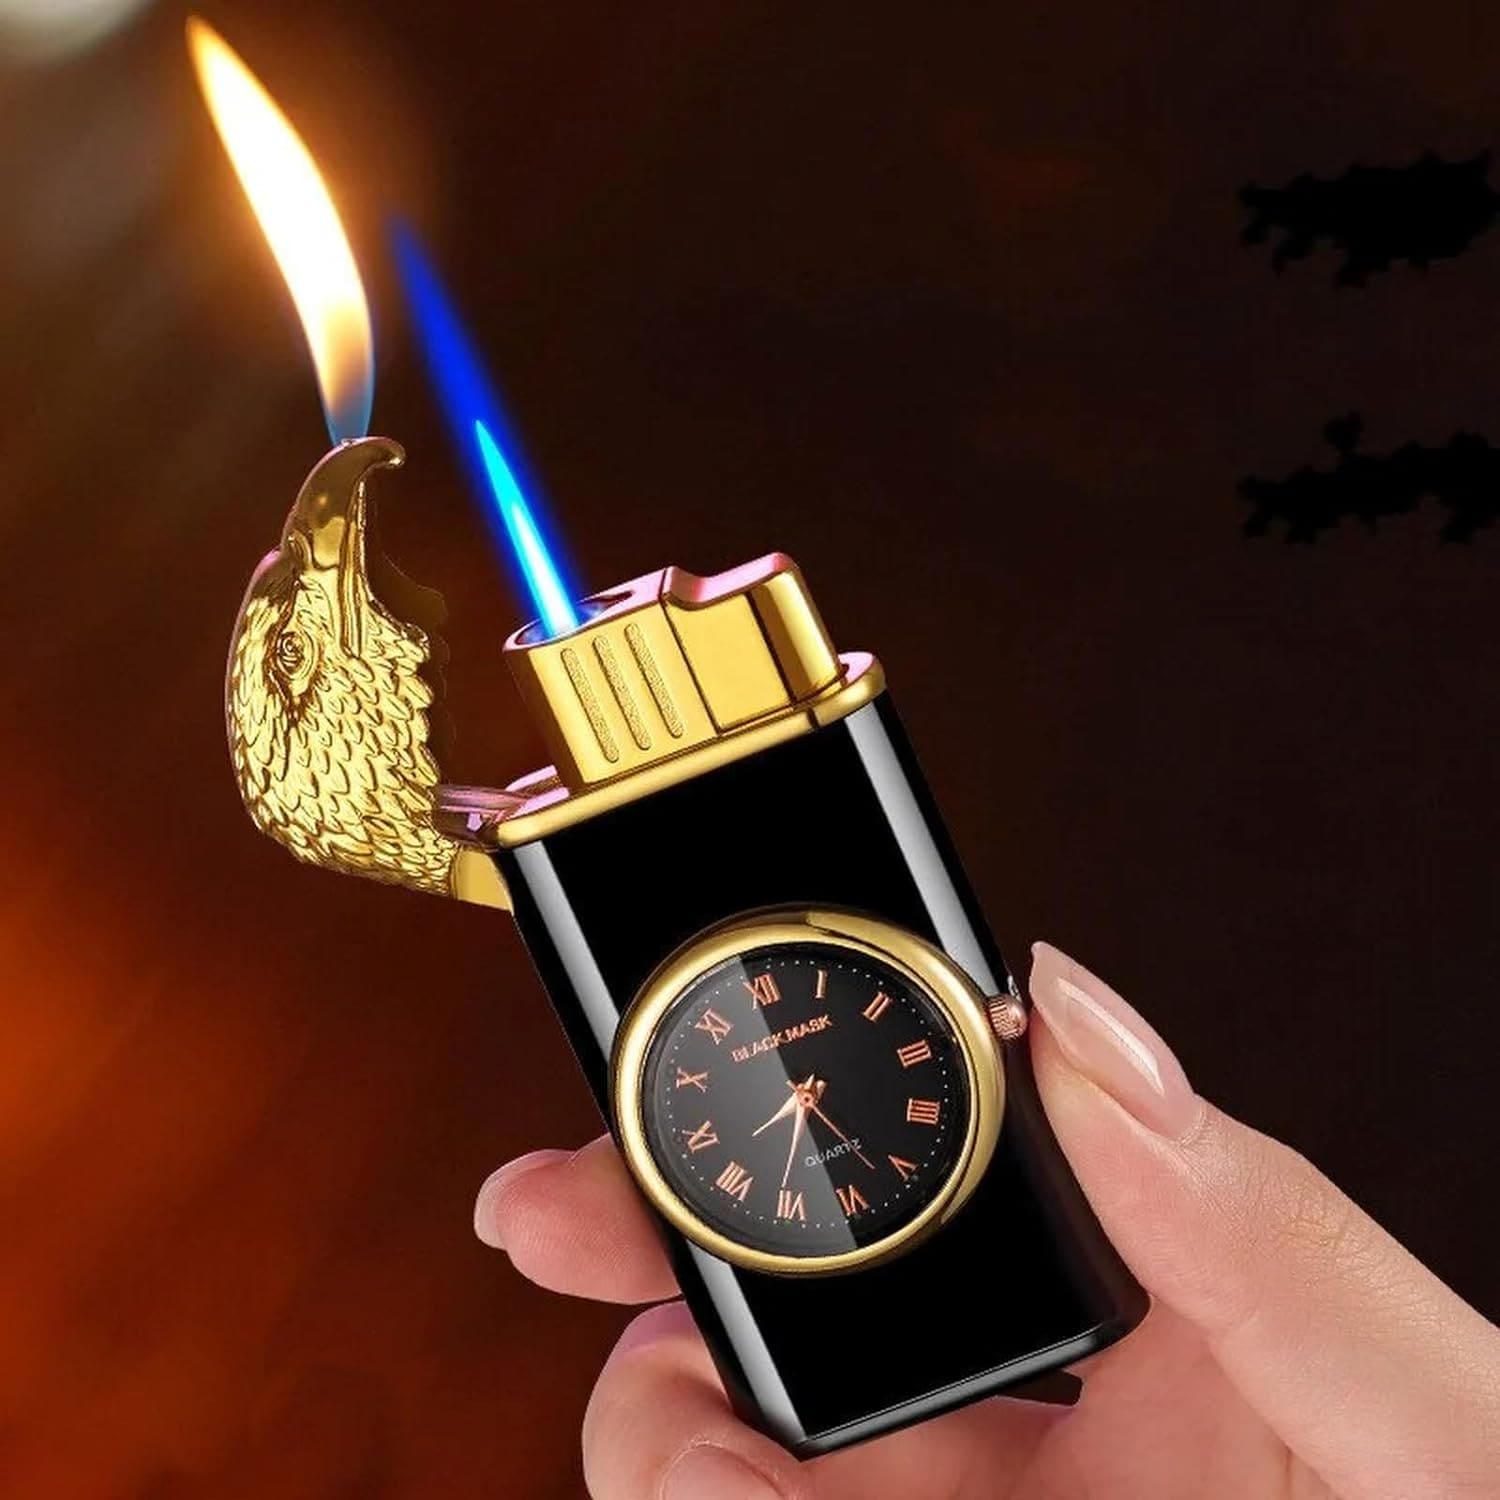 Eagle Head Double Flame Lighter, Metal Torch Turbo Double Fire Lighter, Kitchen Outdoor Portable Barbecue Camping Cigar Lighter, Windproof inflatable Lighter, Refillable Windproof Straight Flame Lighter